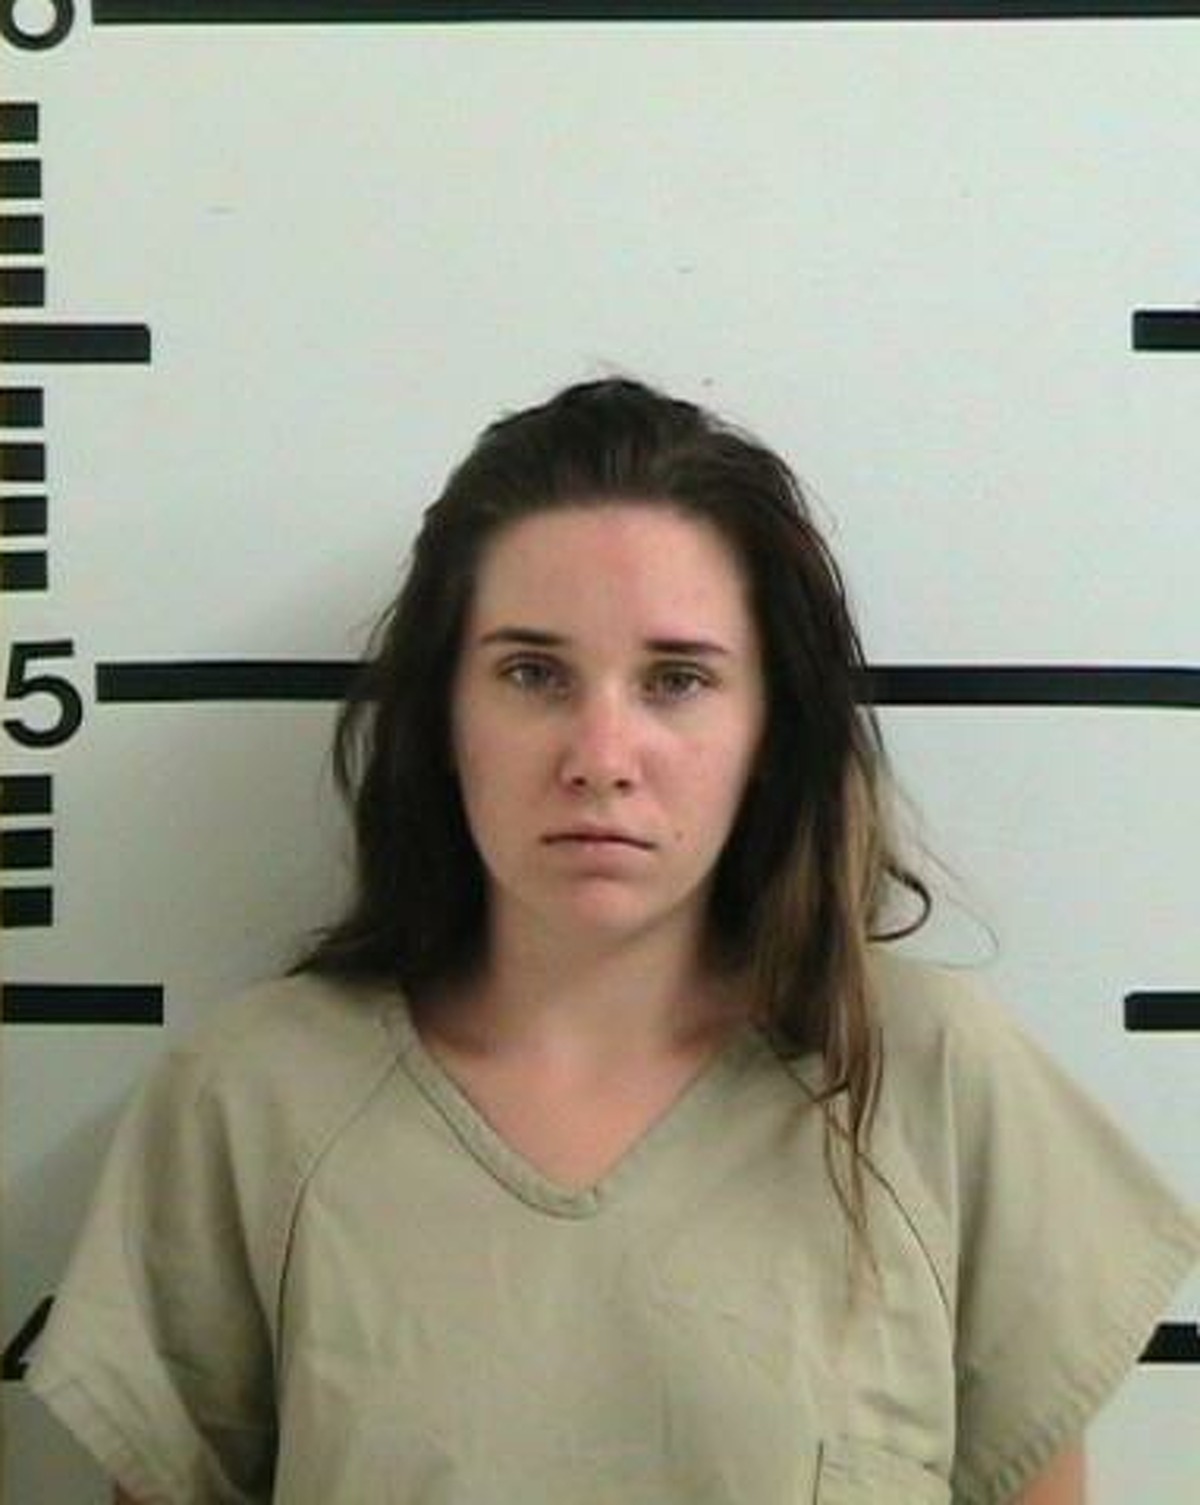 Amanda Kristene Hawkins, 19, was charged with two counts of child endangerment after her two daughters, ages 1 and 2, died June 8 after being left in her SUV for 15 hours in front of a friend's house in Kerrville. Hawkins was arrested in San Antonio and was transferred to the Kerrville jail Monday, June 12.